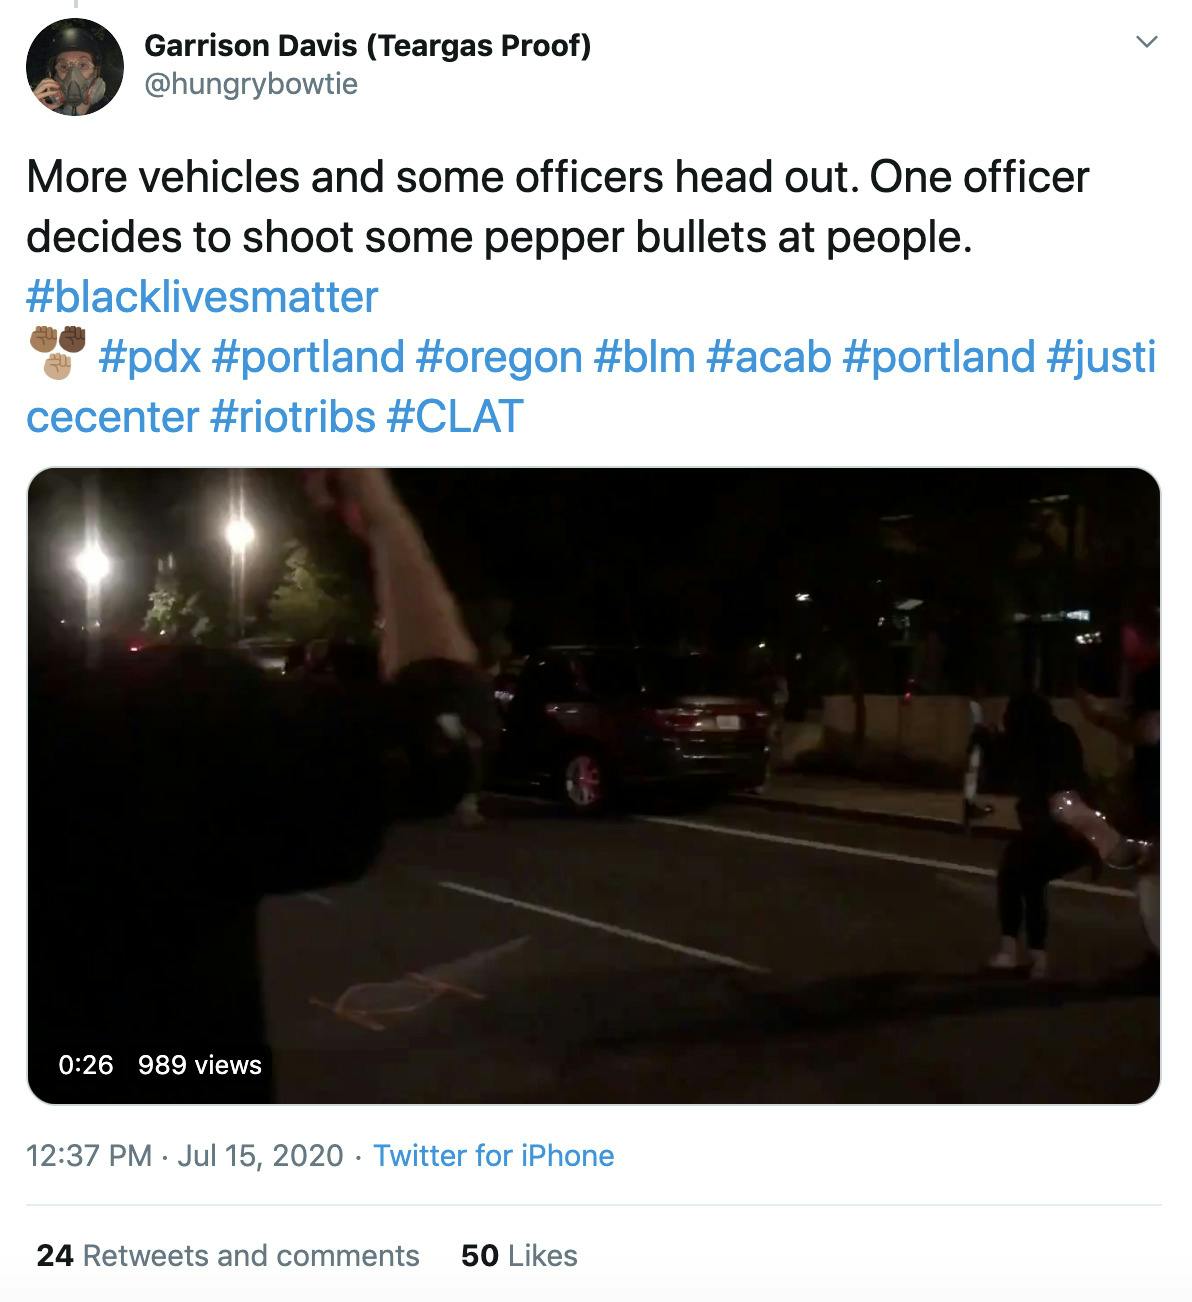 More vehicles and some officers head out. One officer decides to shoot some pepper bullets at people. #blacklivesmatter #pdx #portland #oregon #blm #acab #portland #justicecenter #riotribs #CLAT' video footage